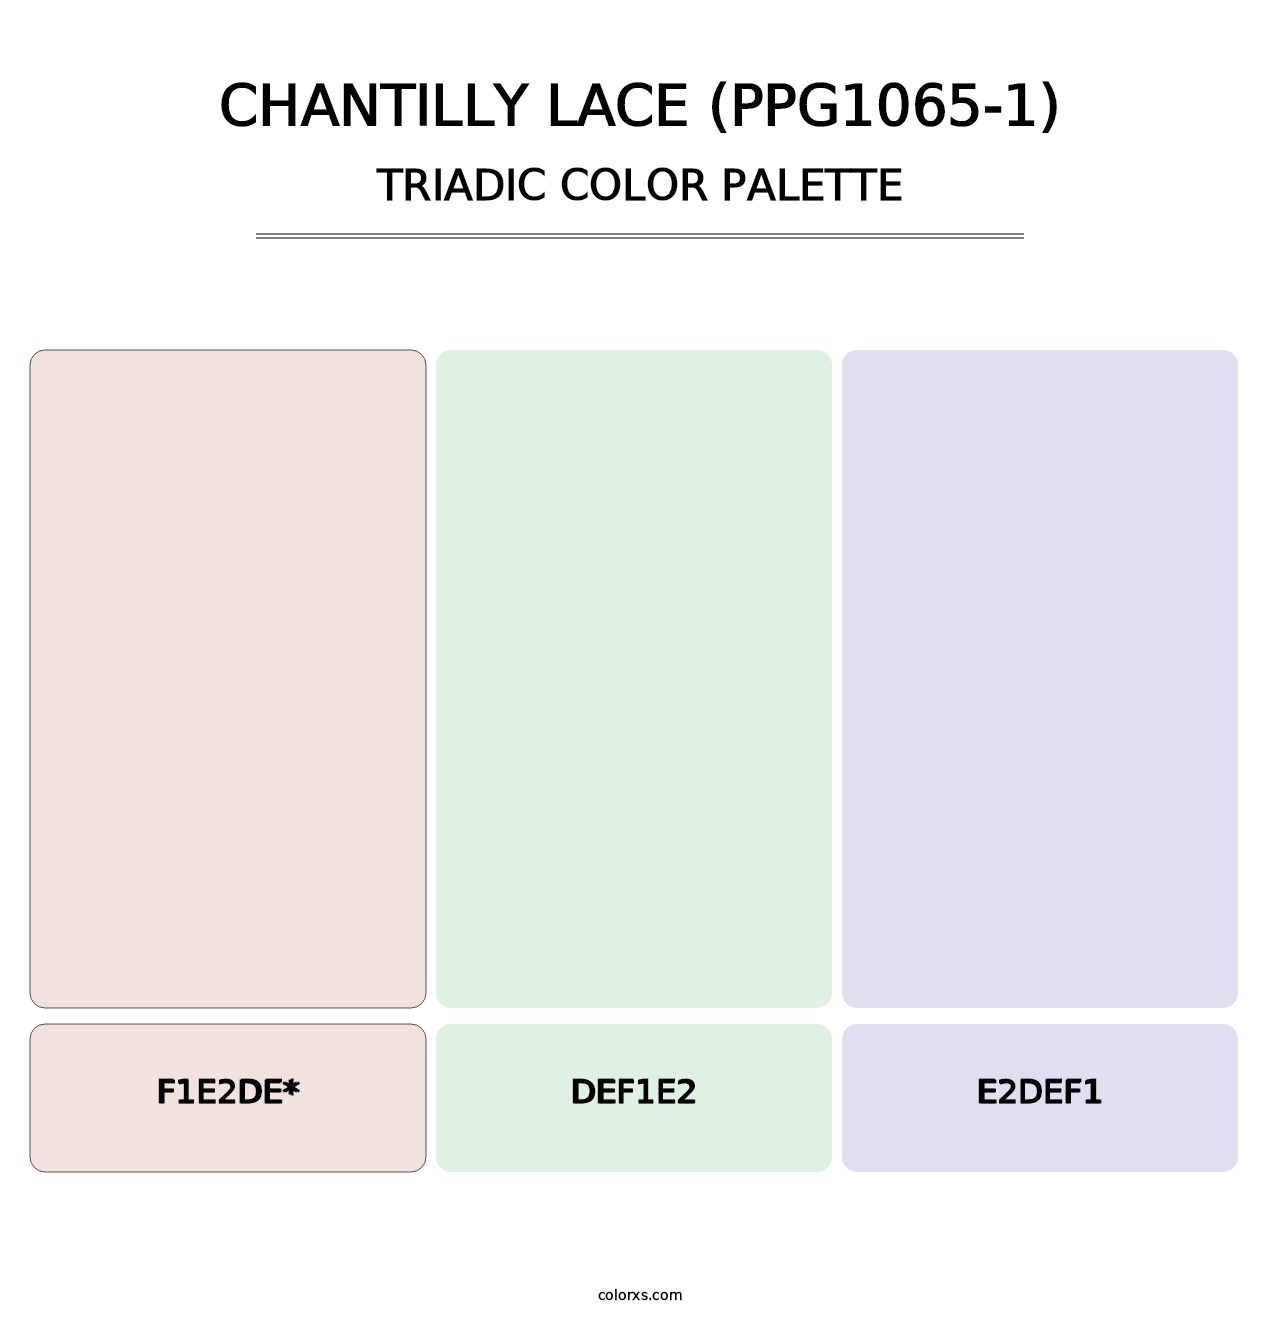 Chantilly Lace (PPG1065-1) - Triadic Color Palette